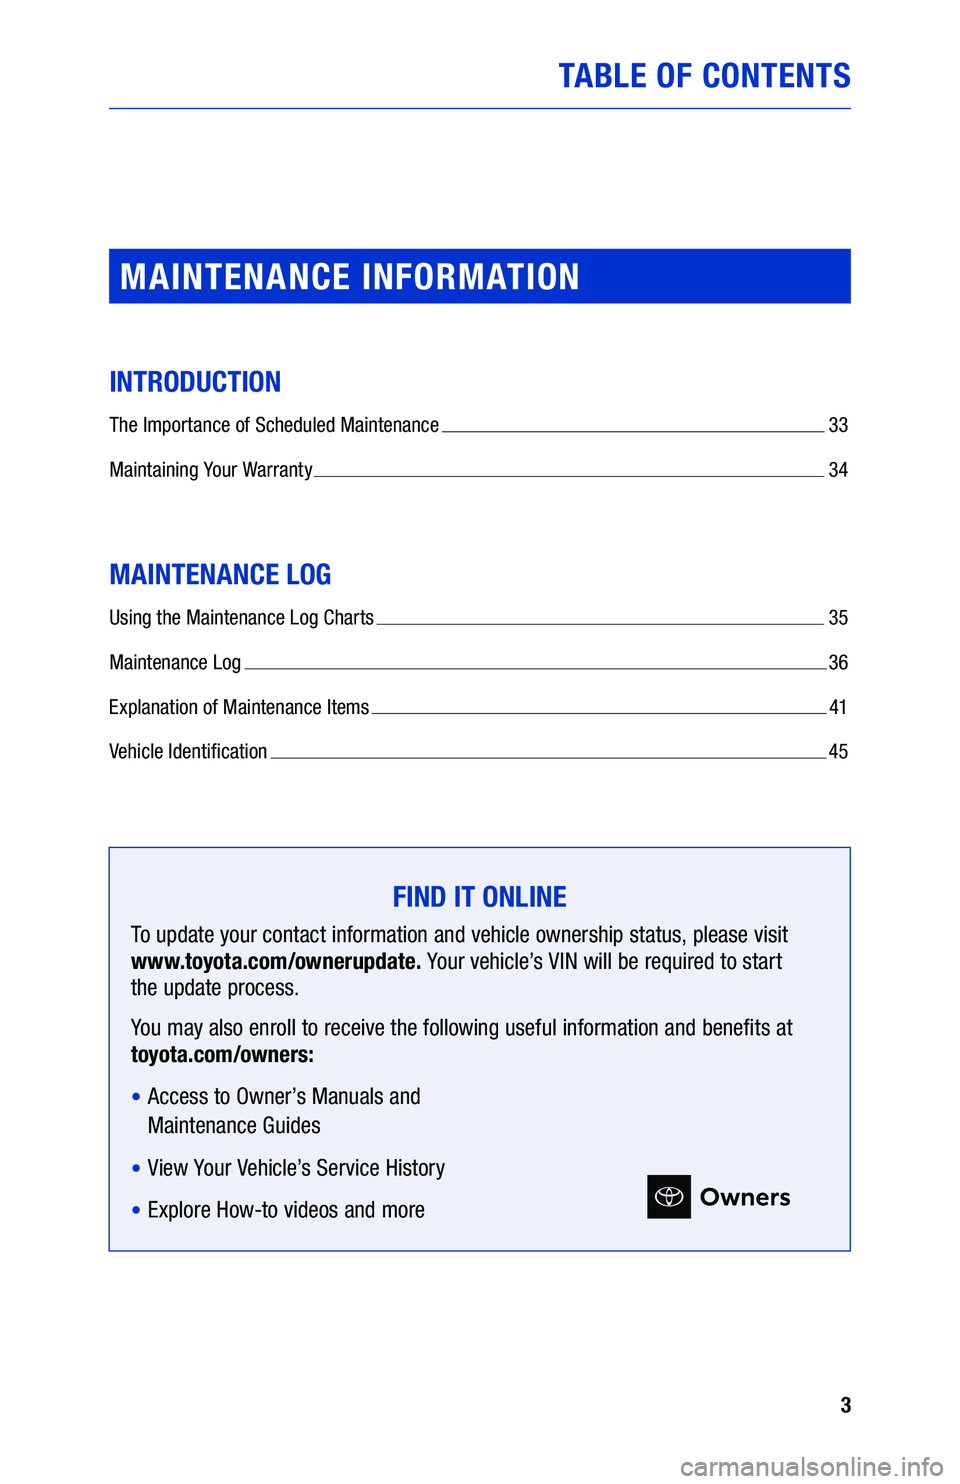 TOYOTA GT86 2020  Warranties & Maintenance Guides (in English) 3
TABLE OF CONTENTS
MAINTENANCE INFORMATION
INTRODUCTION
The Importance of Scheduled Maintenance  33
Maintaining Your Warranty 
  34
MAINTENANCE LOG
Using the Maintenance Log Charts   35
Maintenance L